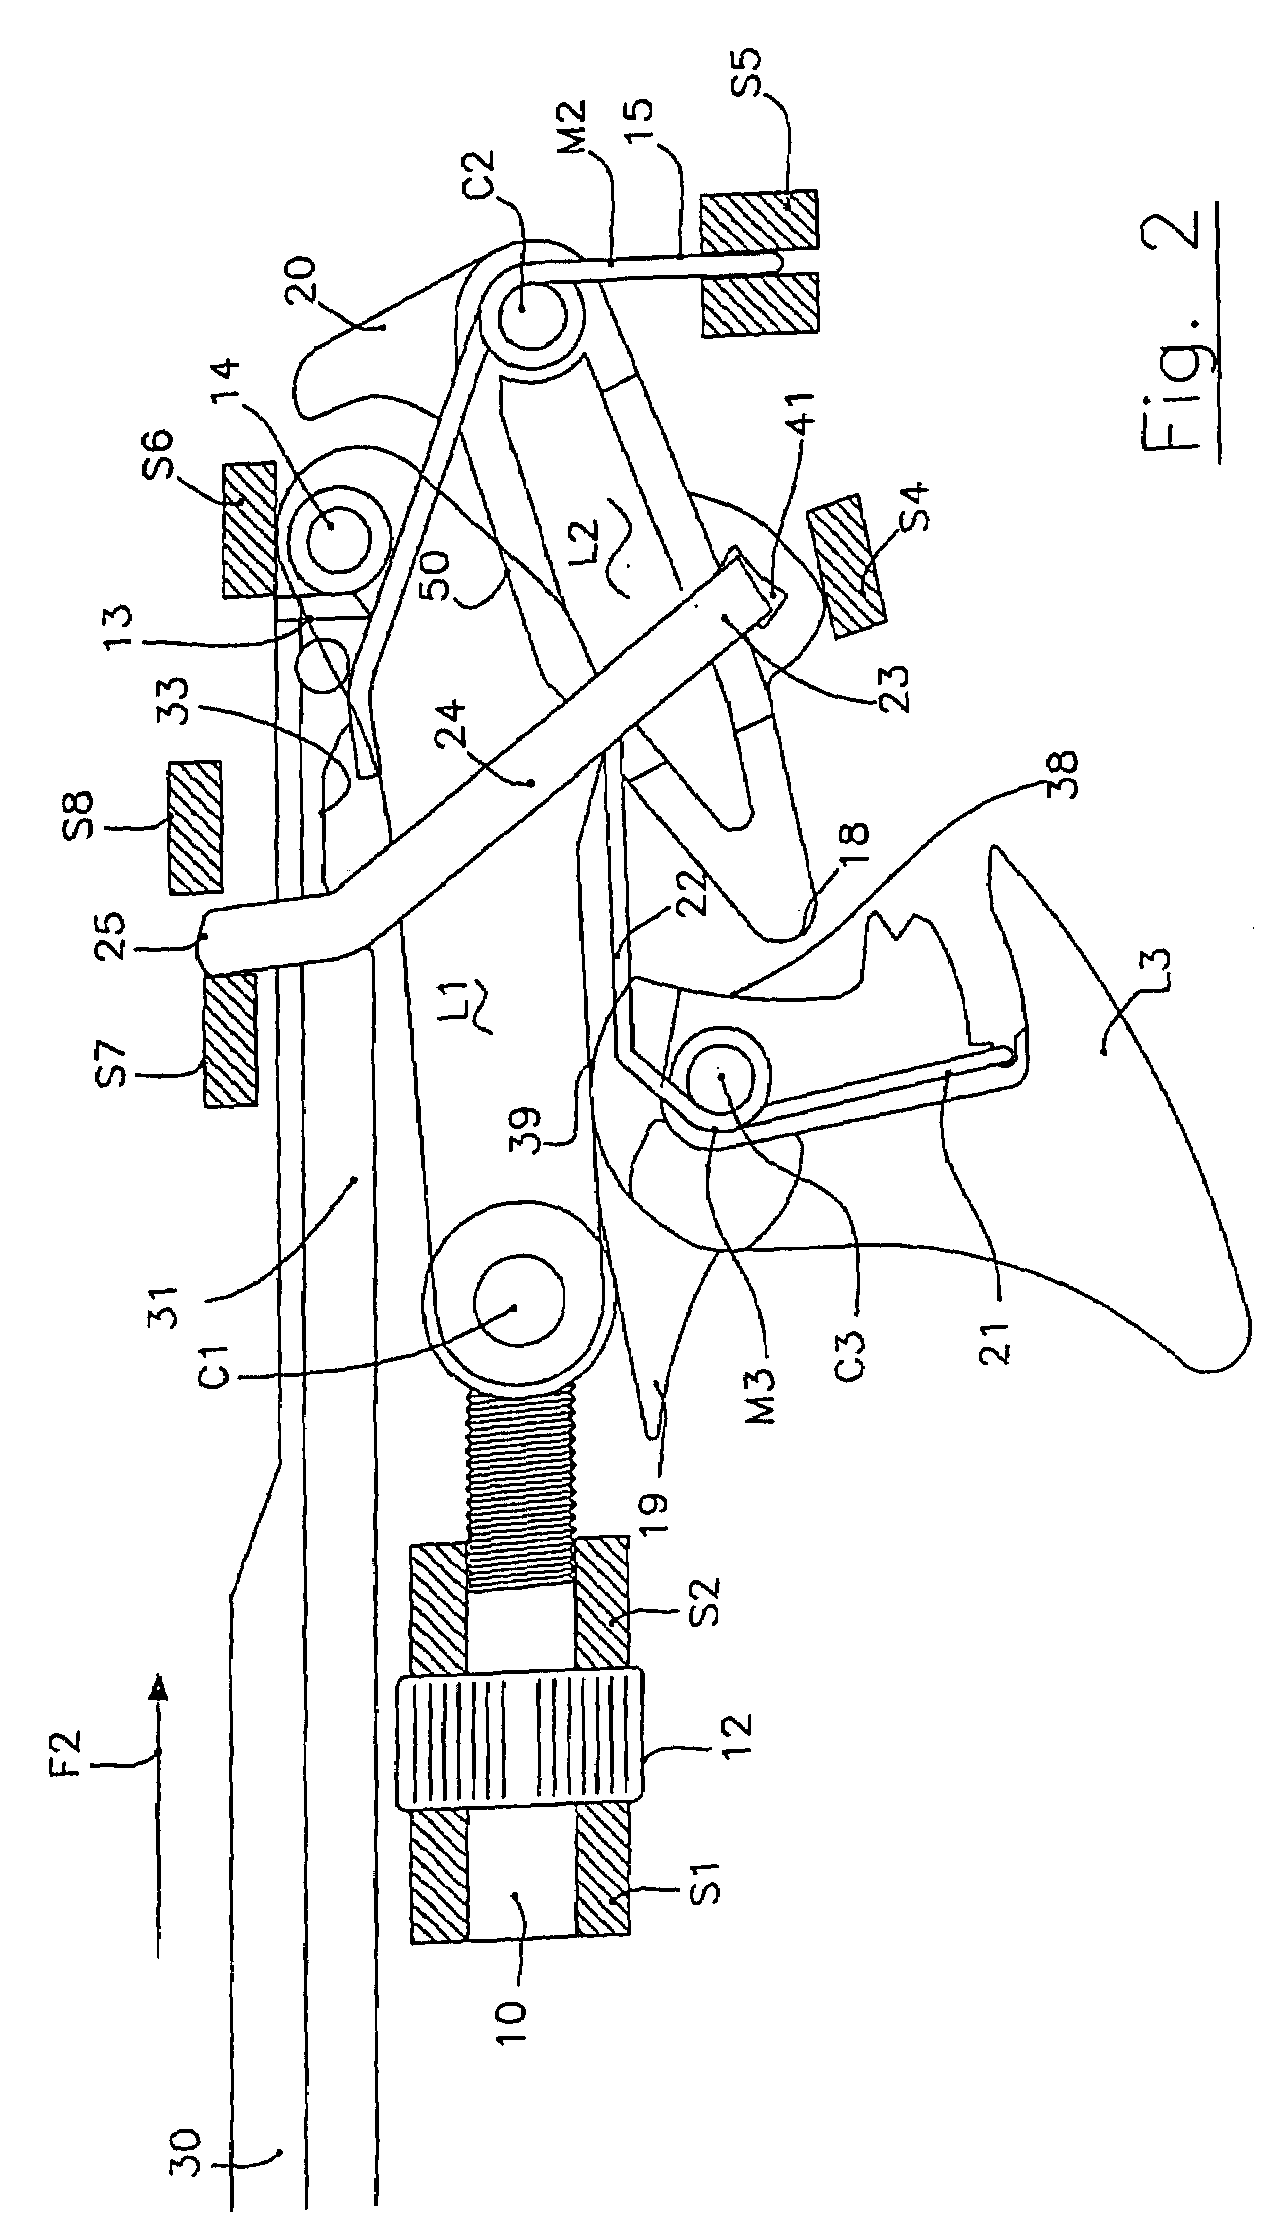 Device for releasing a spear shaft of a spear gun for scuba diving or the like